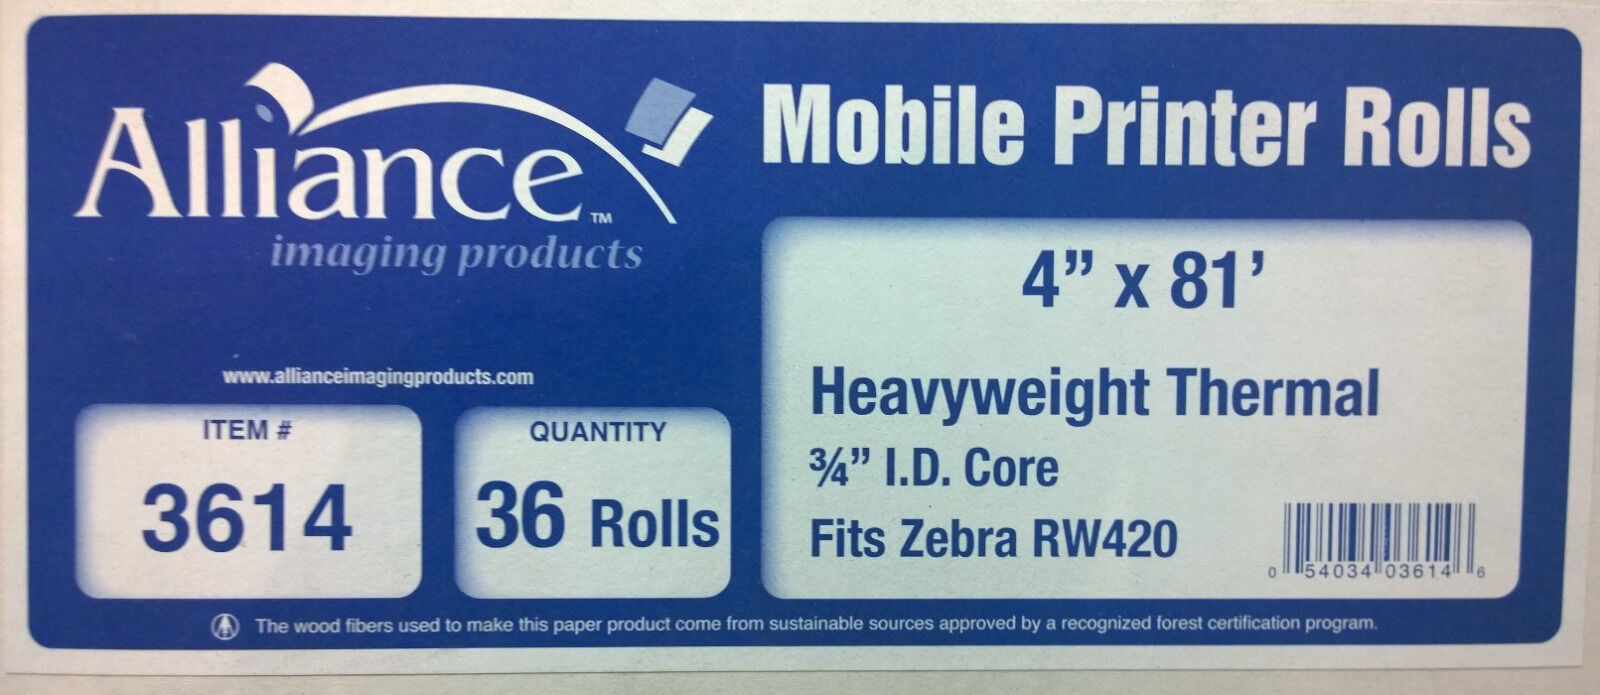 THERMAL RECEIPT ROLLS - BROTHER & ZEBRA MOBILE PRINTERS 4 in x 81 ft, 36 ROLLS